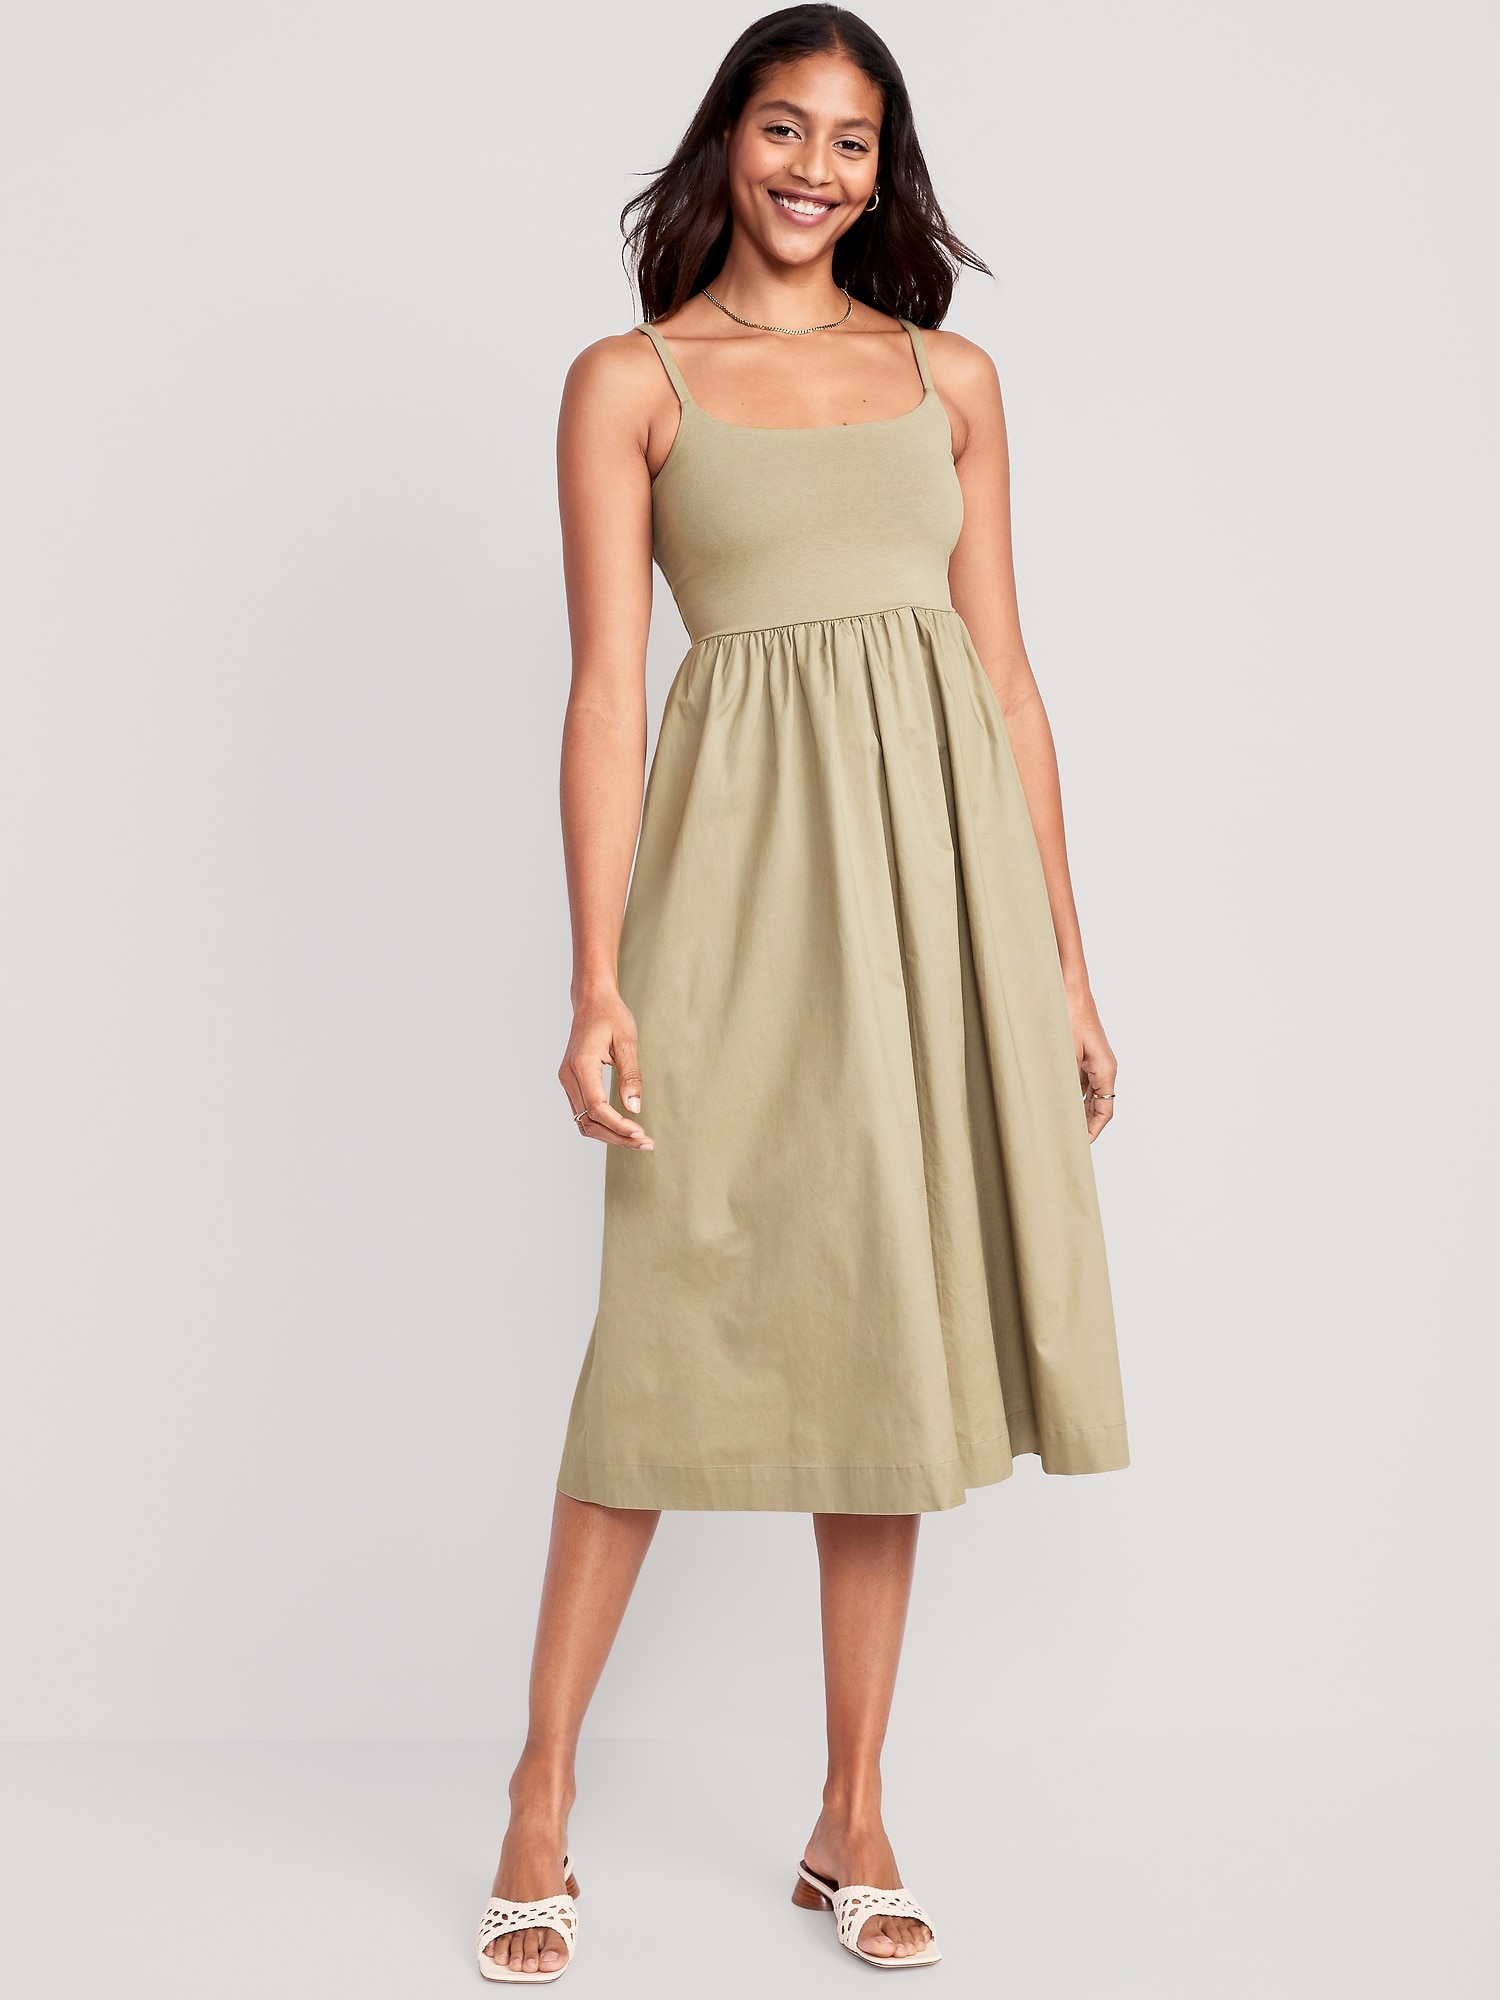 Romilly Midi Dress - Strapless Fit & Flare in Ivory | Showpo USA